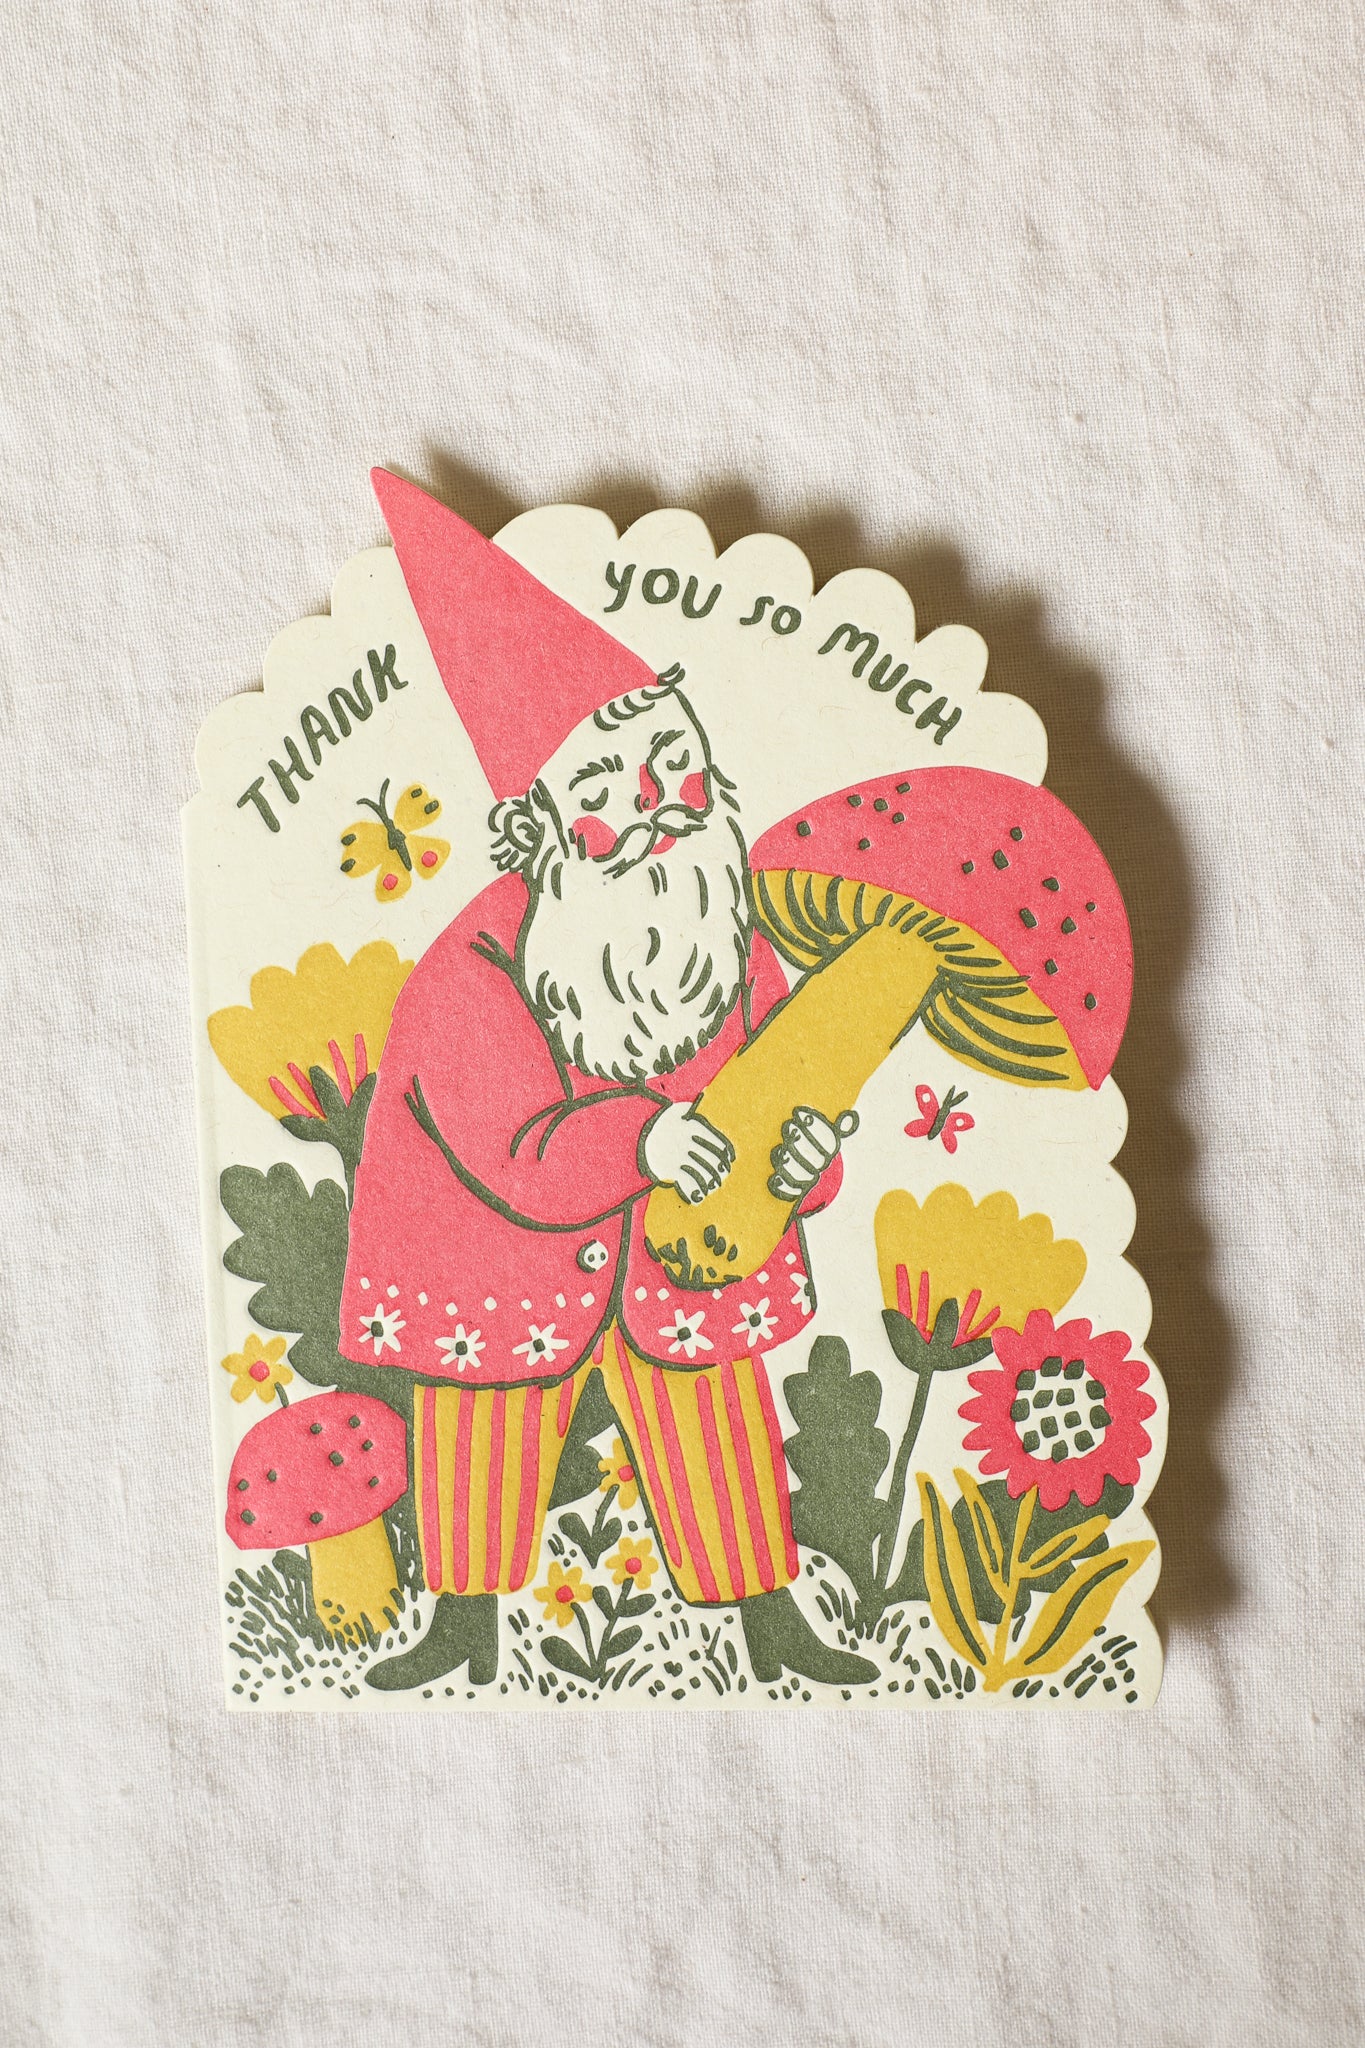 Thank You Gnome Greeting Card